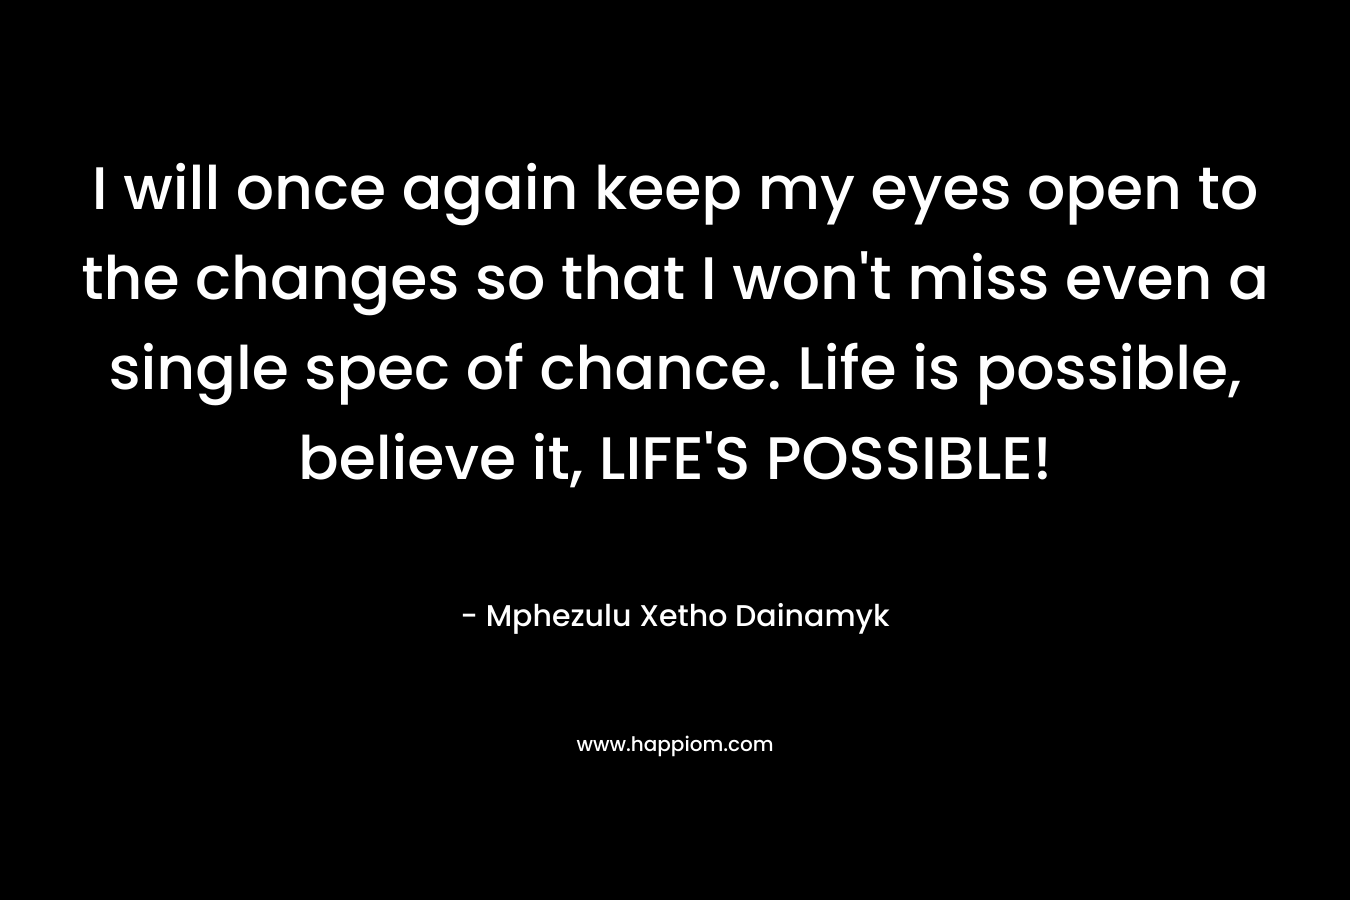 I will once again keep my eyes open to the changes so that I won't miss even a single spec of chance. Life is possible, believe it, LIFE'S POSSIBLE!